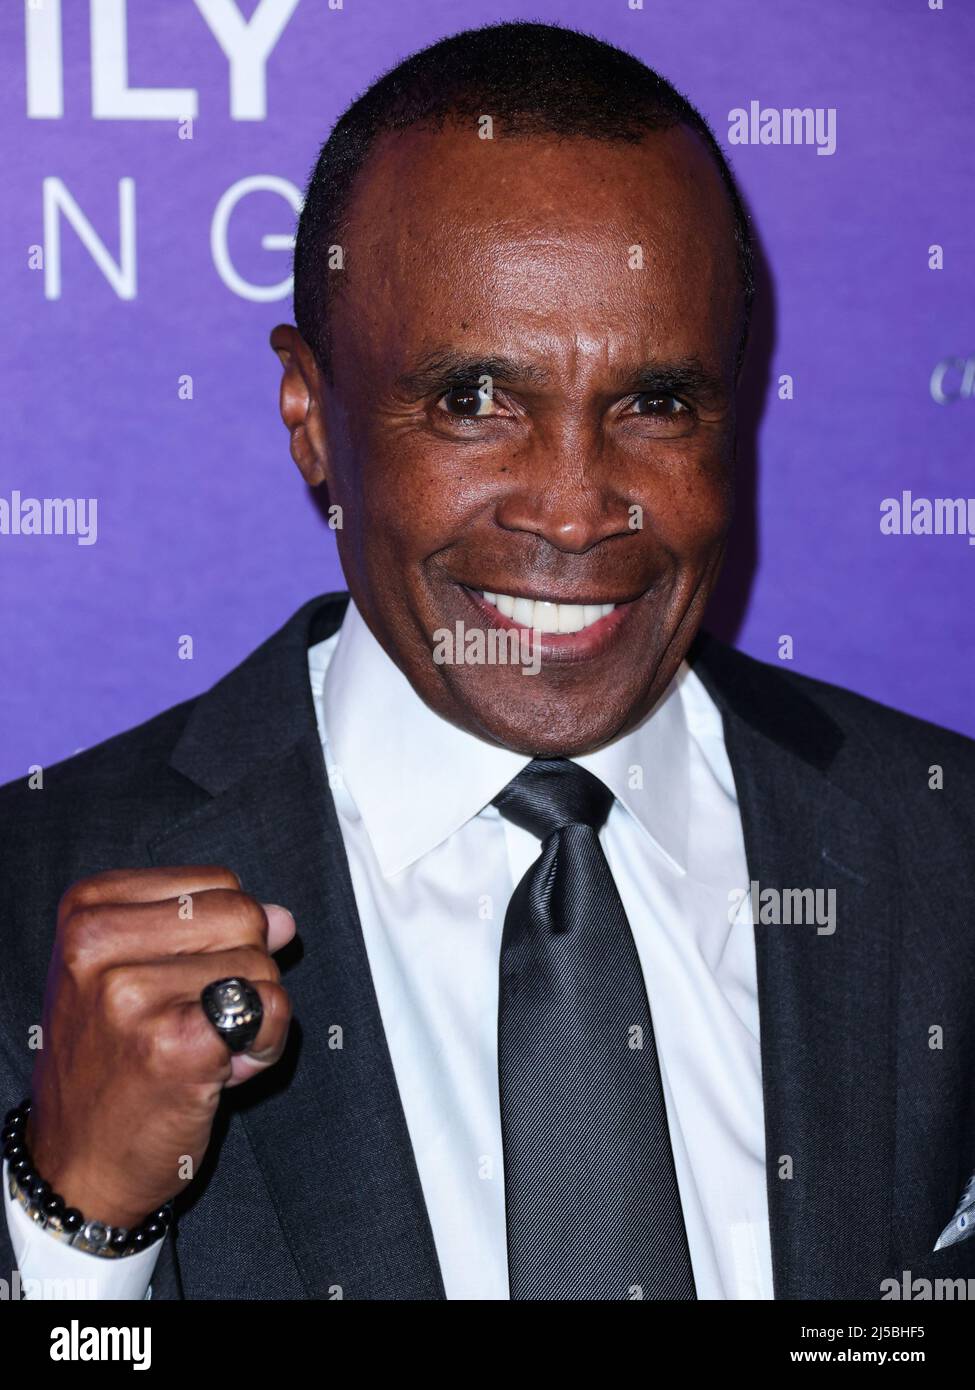 Hollywood, USA. 21st Apr, 2022. West Hollywood, United States. 21st Apr, 2022. WEST HOLLYWOOD, LOS ANGELES, CALIFORNIA, USA - APRIL 21: American former professional boxer Sugar Ray Leonard arrives at the LA Family Housing (LAFH) Awards 2022 held at the Pacific Design Center on April 21, 2022 in West Hollywood, Los Angeles, California, United States. (Photo by Xavier Collin/Image Press Agency) Credit: Image Press Agency/Alamy Live News Credit: Image Press Agency/Alamy Live News Stock Photo